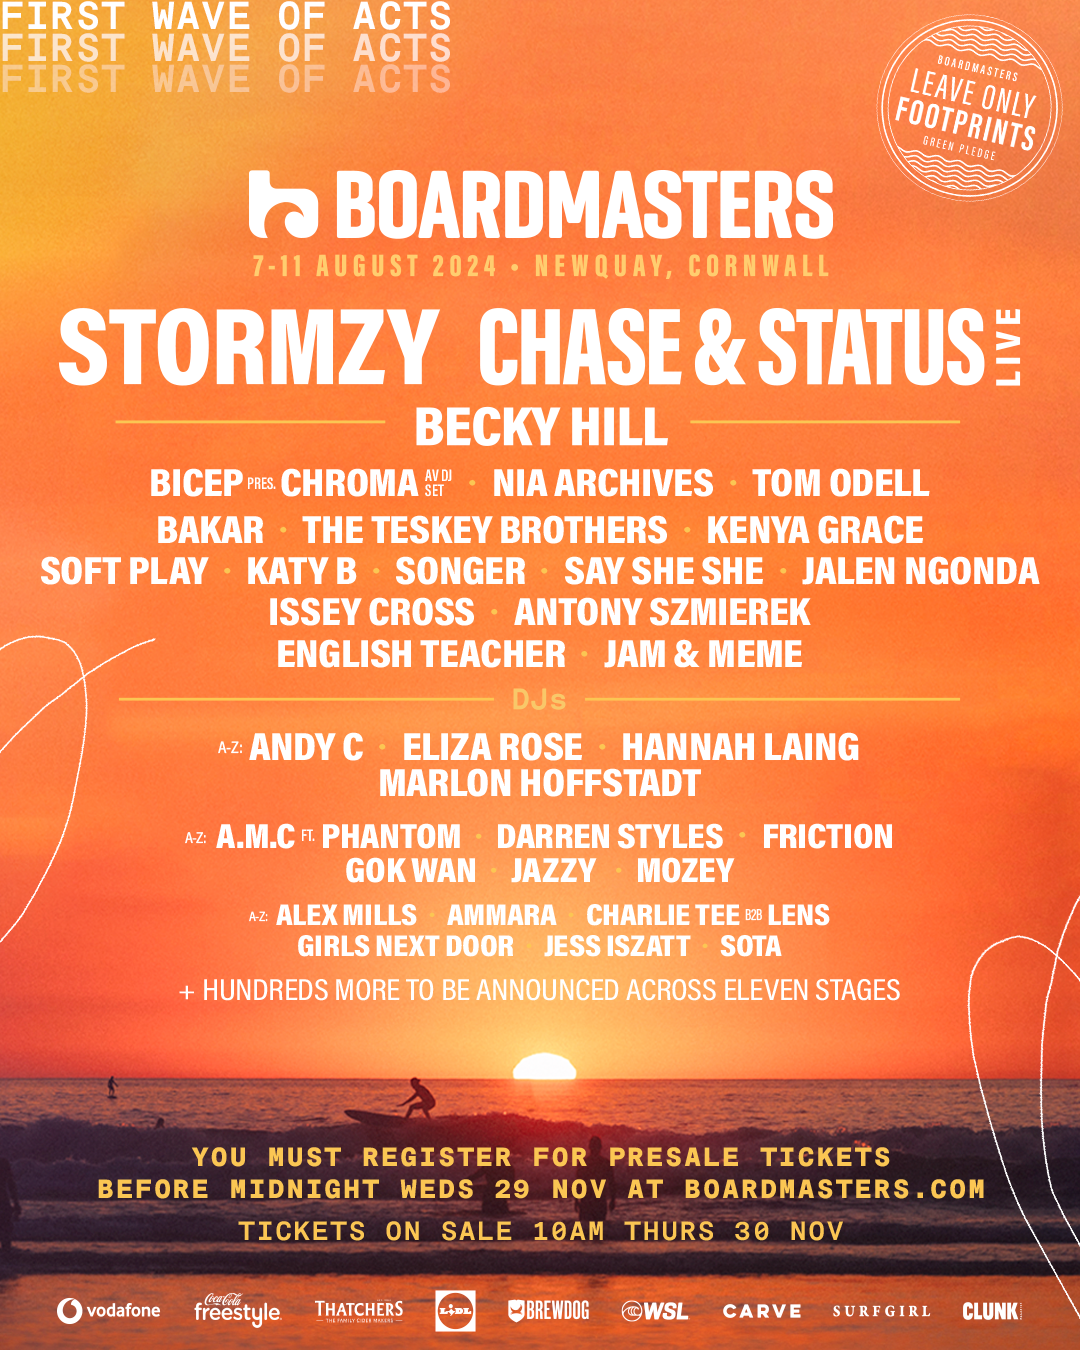 Boardmasters 2024 announces Stormzy, Chase and Status, Bicep and more